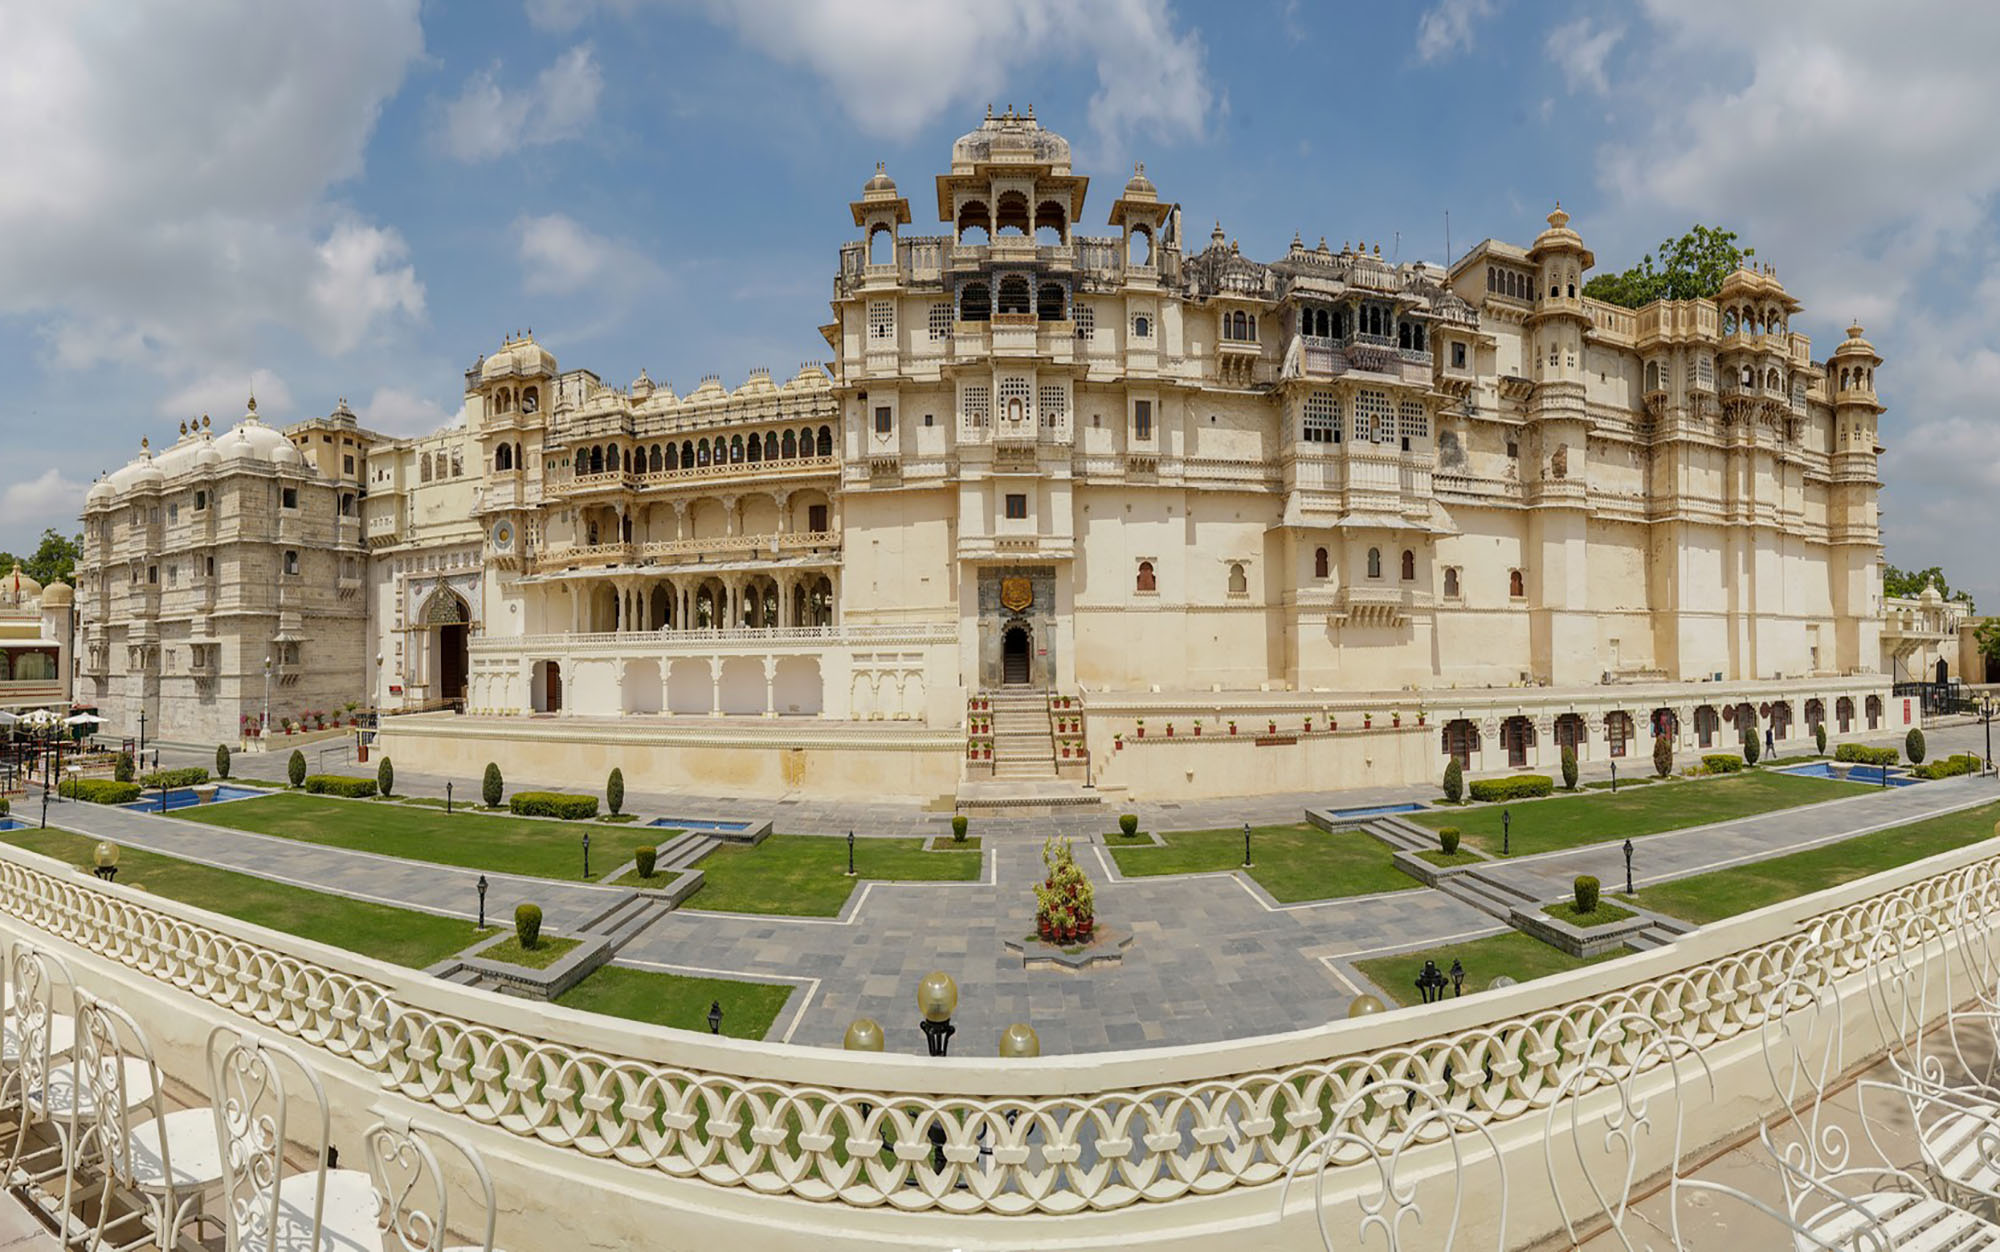 The City Palace Museum, Udaipur